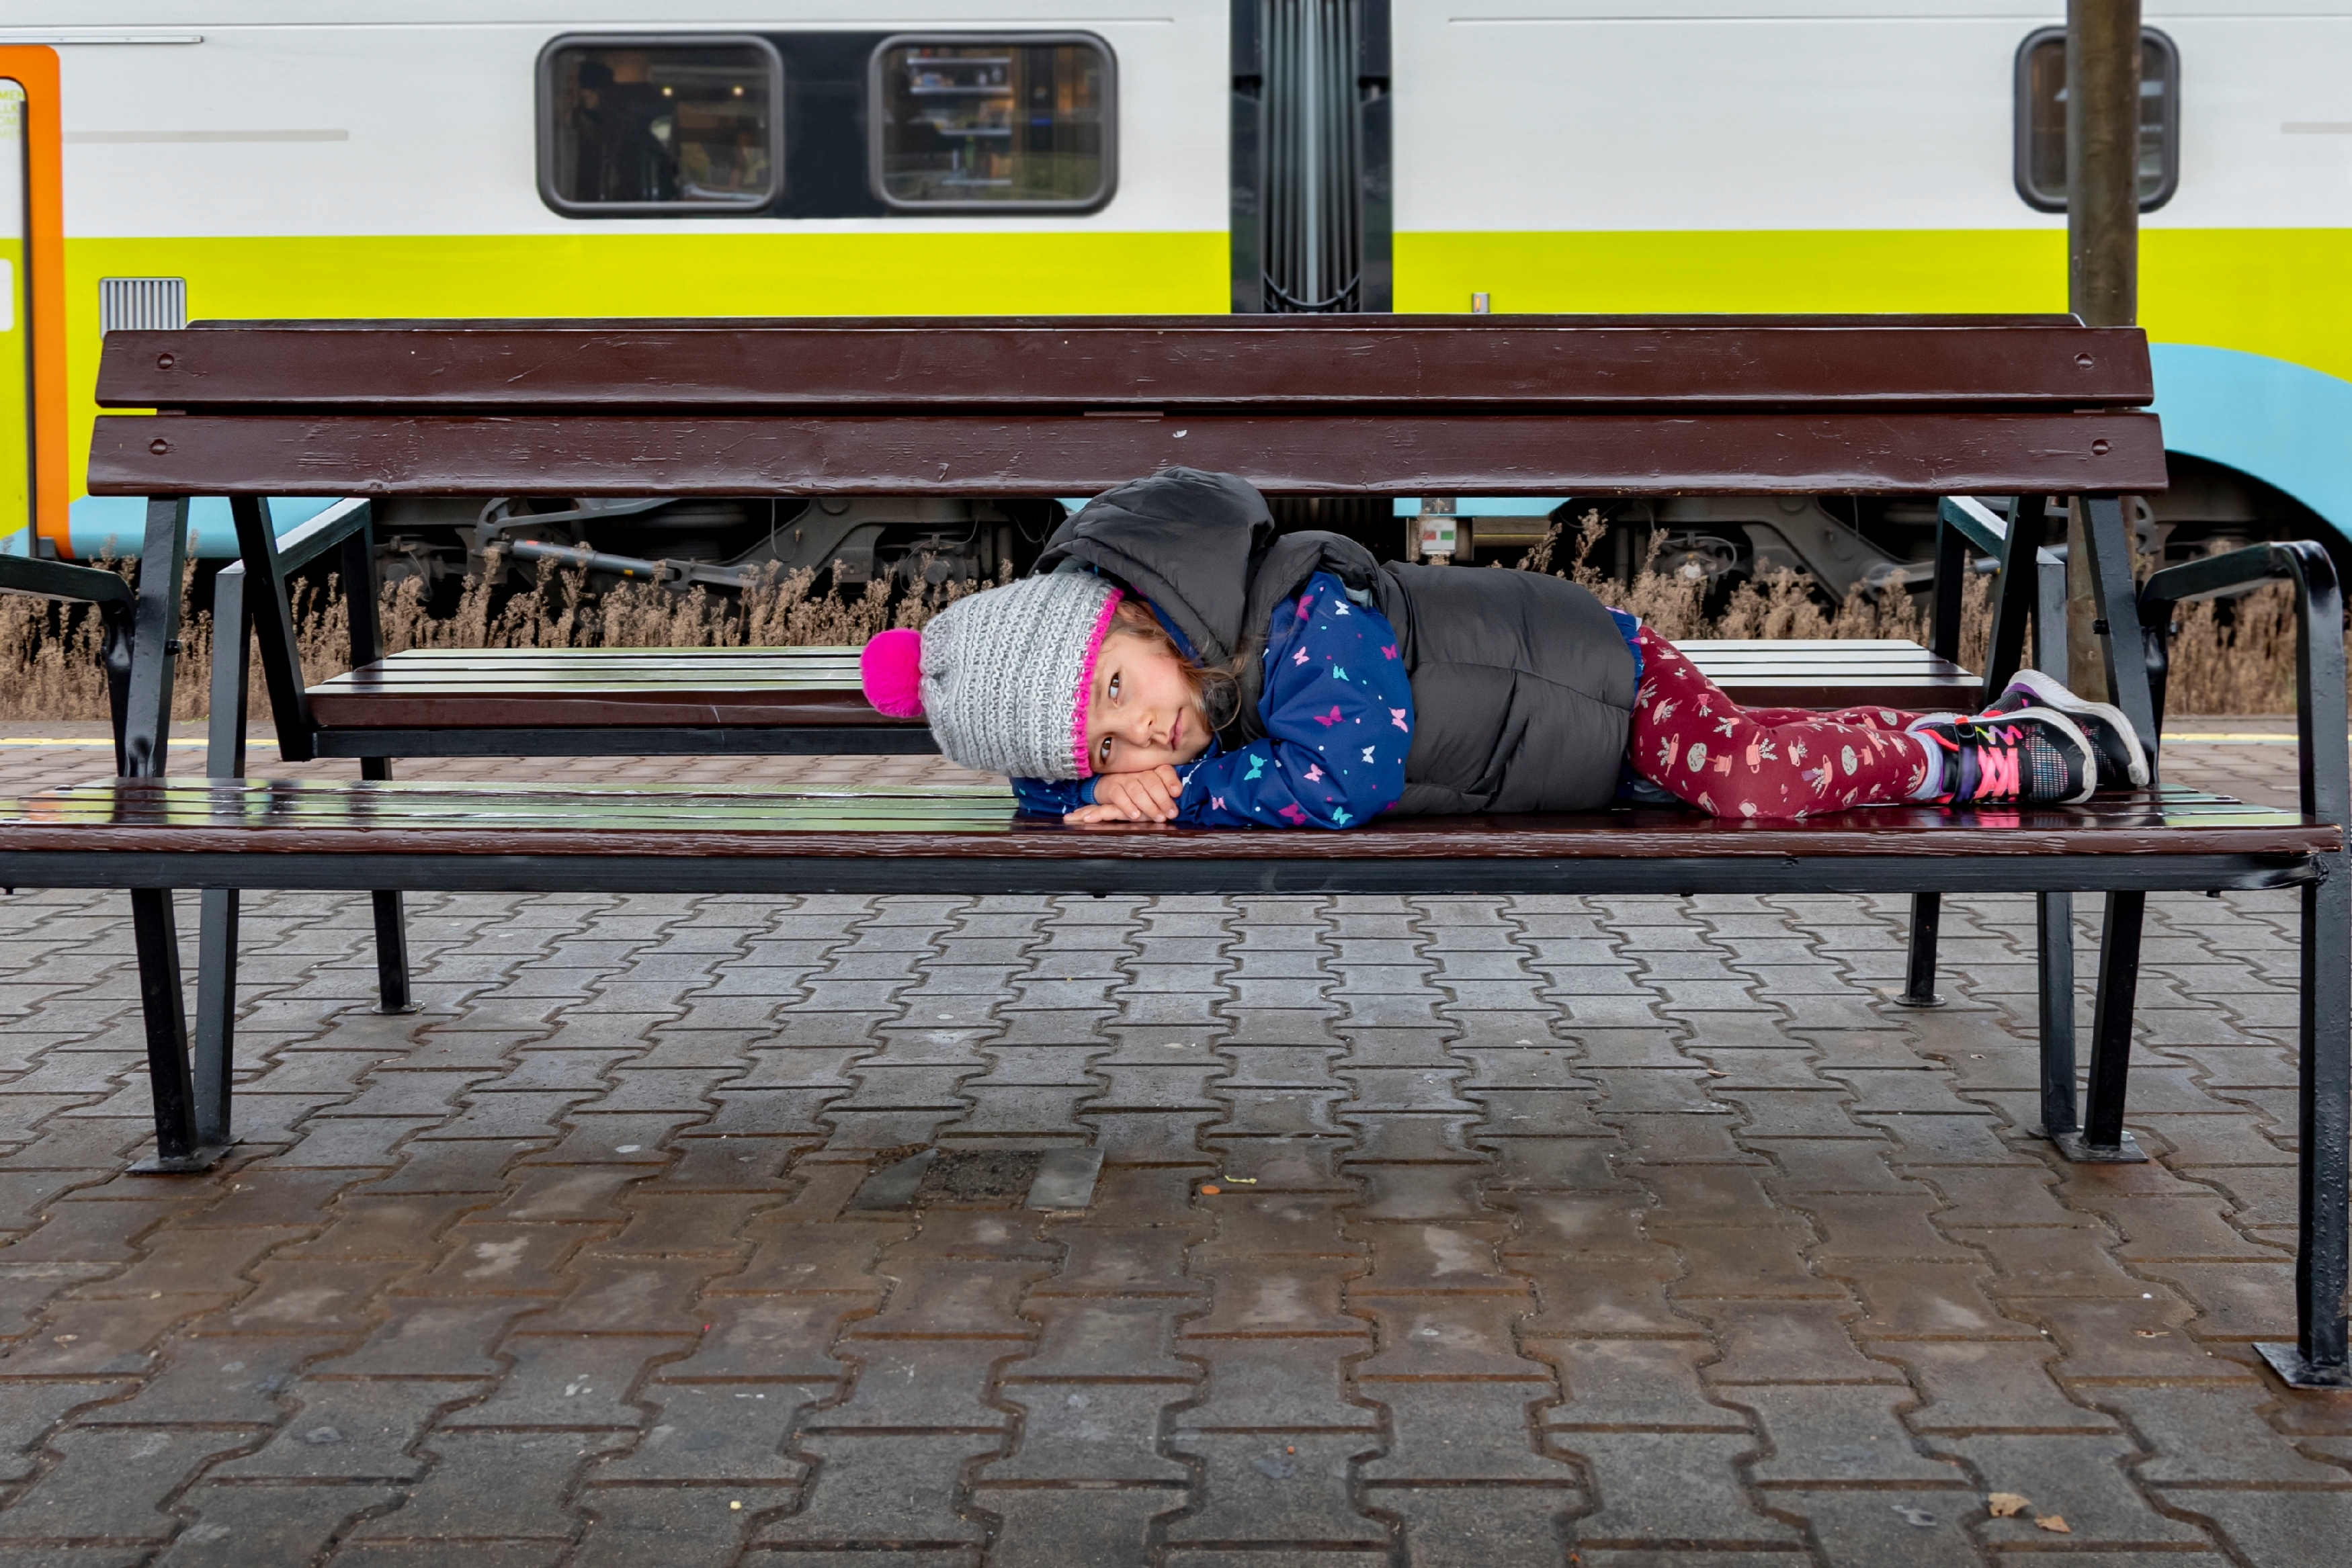 Lonely little girl lying on a wooden bench | Source: Shutterstock